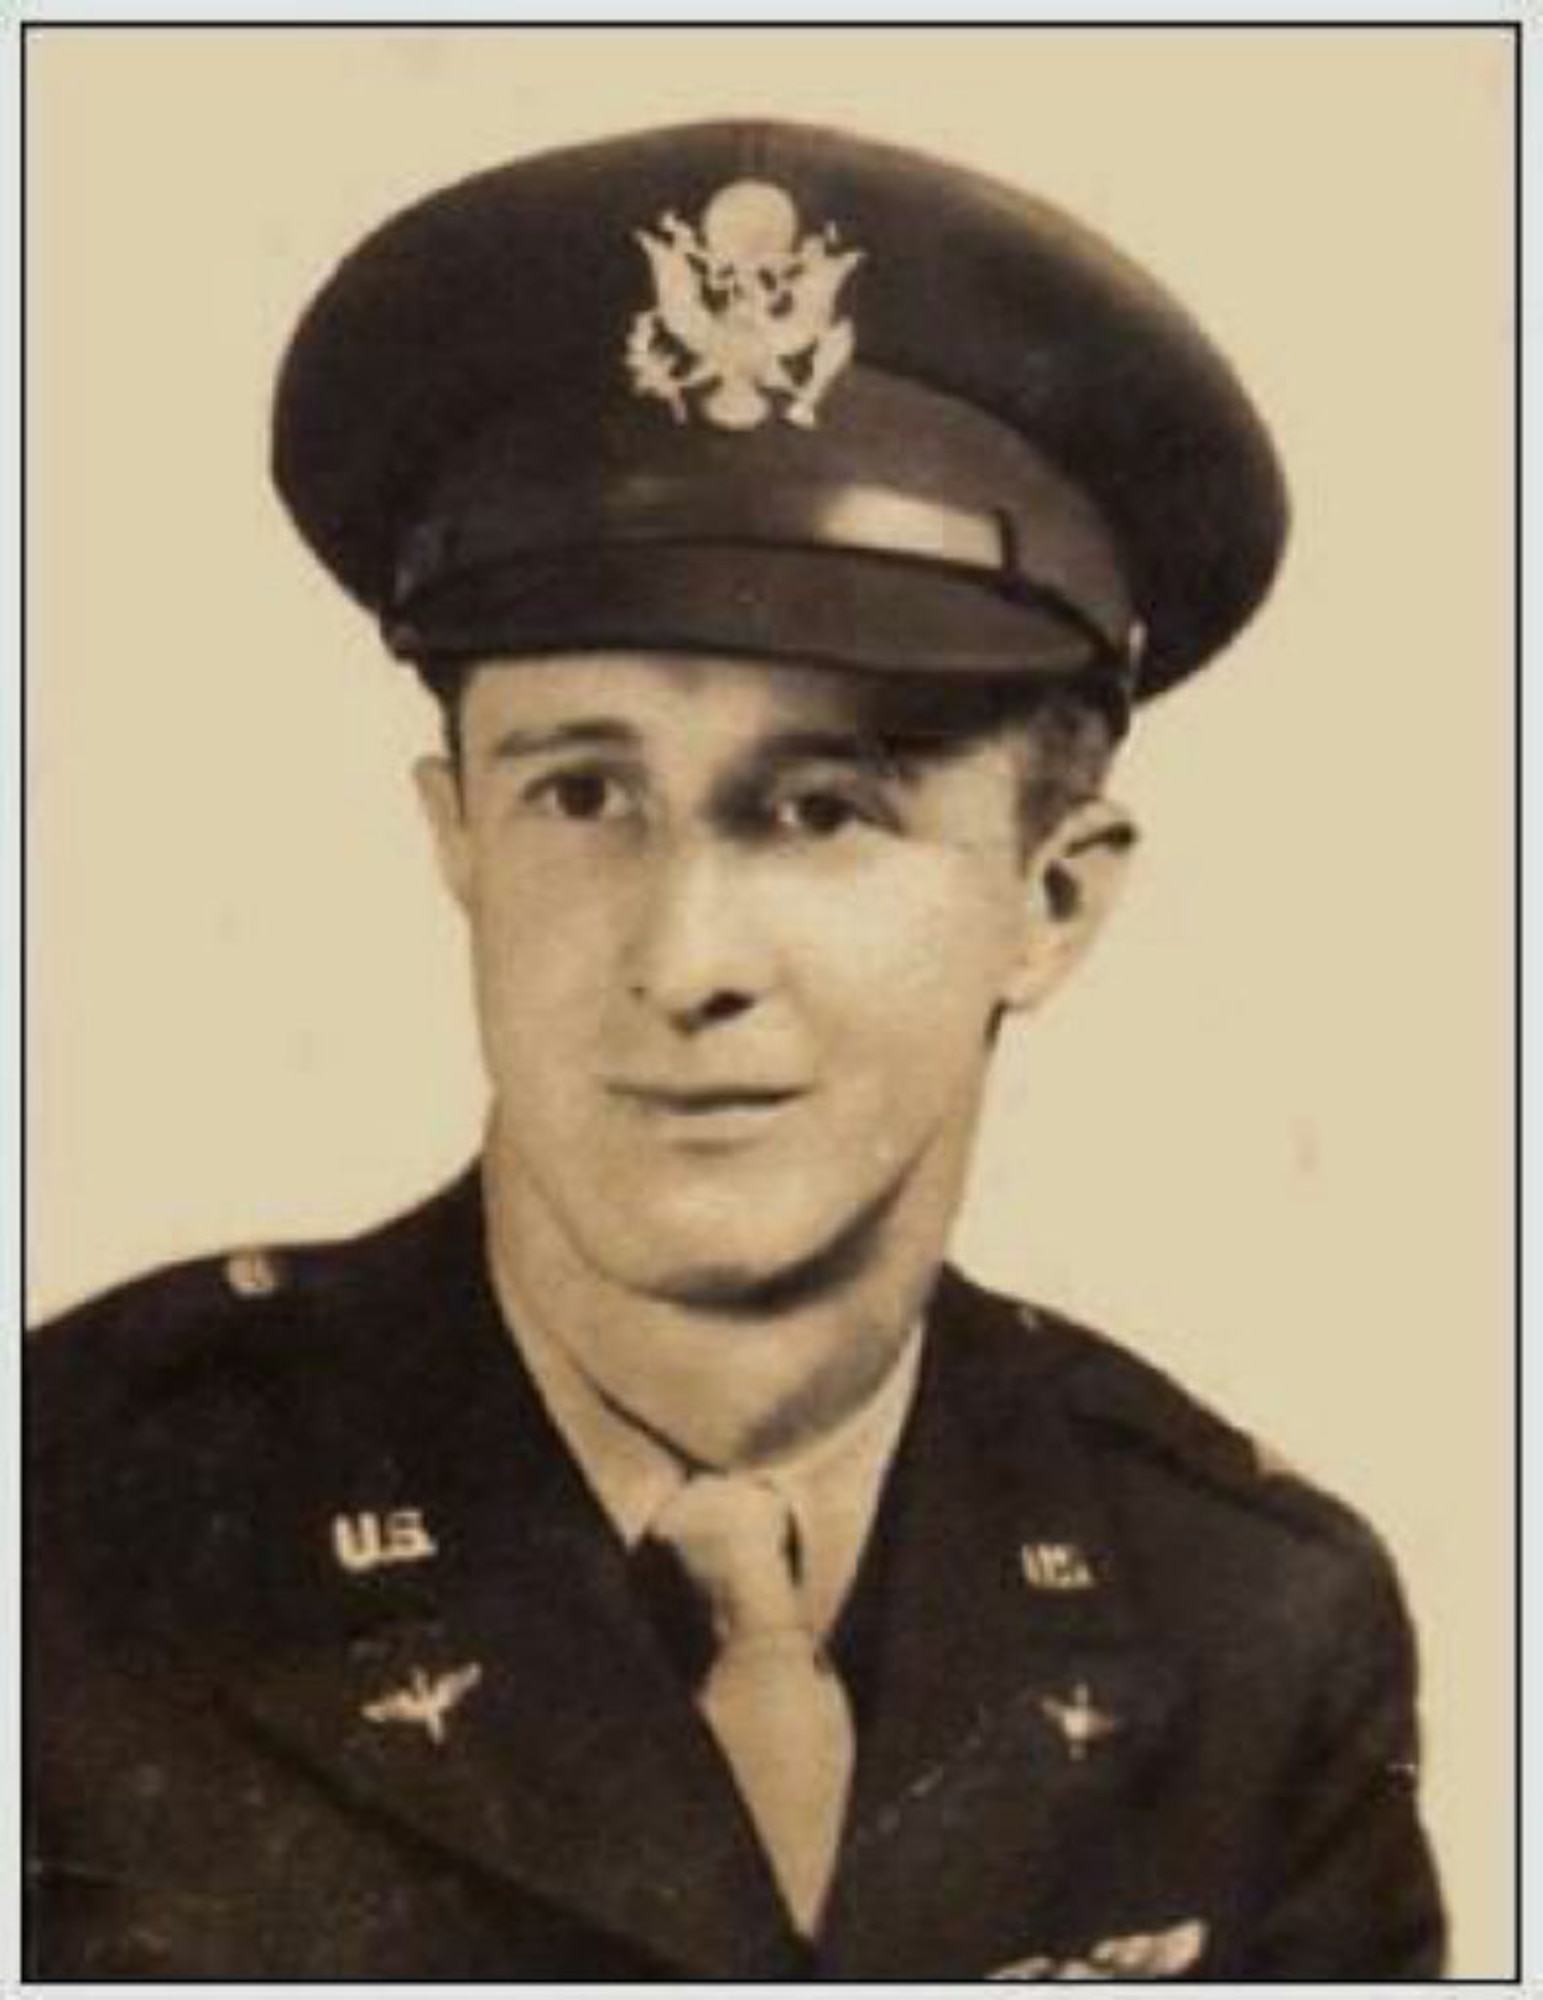 U.S. Army Air Corps 1st Lt. John D. Crouchley, poses for an official photo during World War II. Crouchley was assigned to the 828th Bombardment Squadron, 485th Bombardment Group, Foggia, Italy, and went into combat in May 1944. His aircraft was shot down over Bulgaria June 28, 1944, when he and his crew were returning from a bombing mission over Romania. He was missing in action for 73 years until his partial remains were discovered by a team from the Defense POW/MIA Accounting Agency in 2017 and positively identified in September 2018. (Courtesy photo)